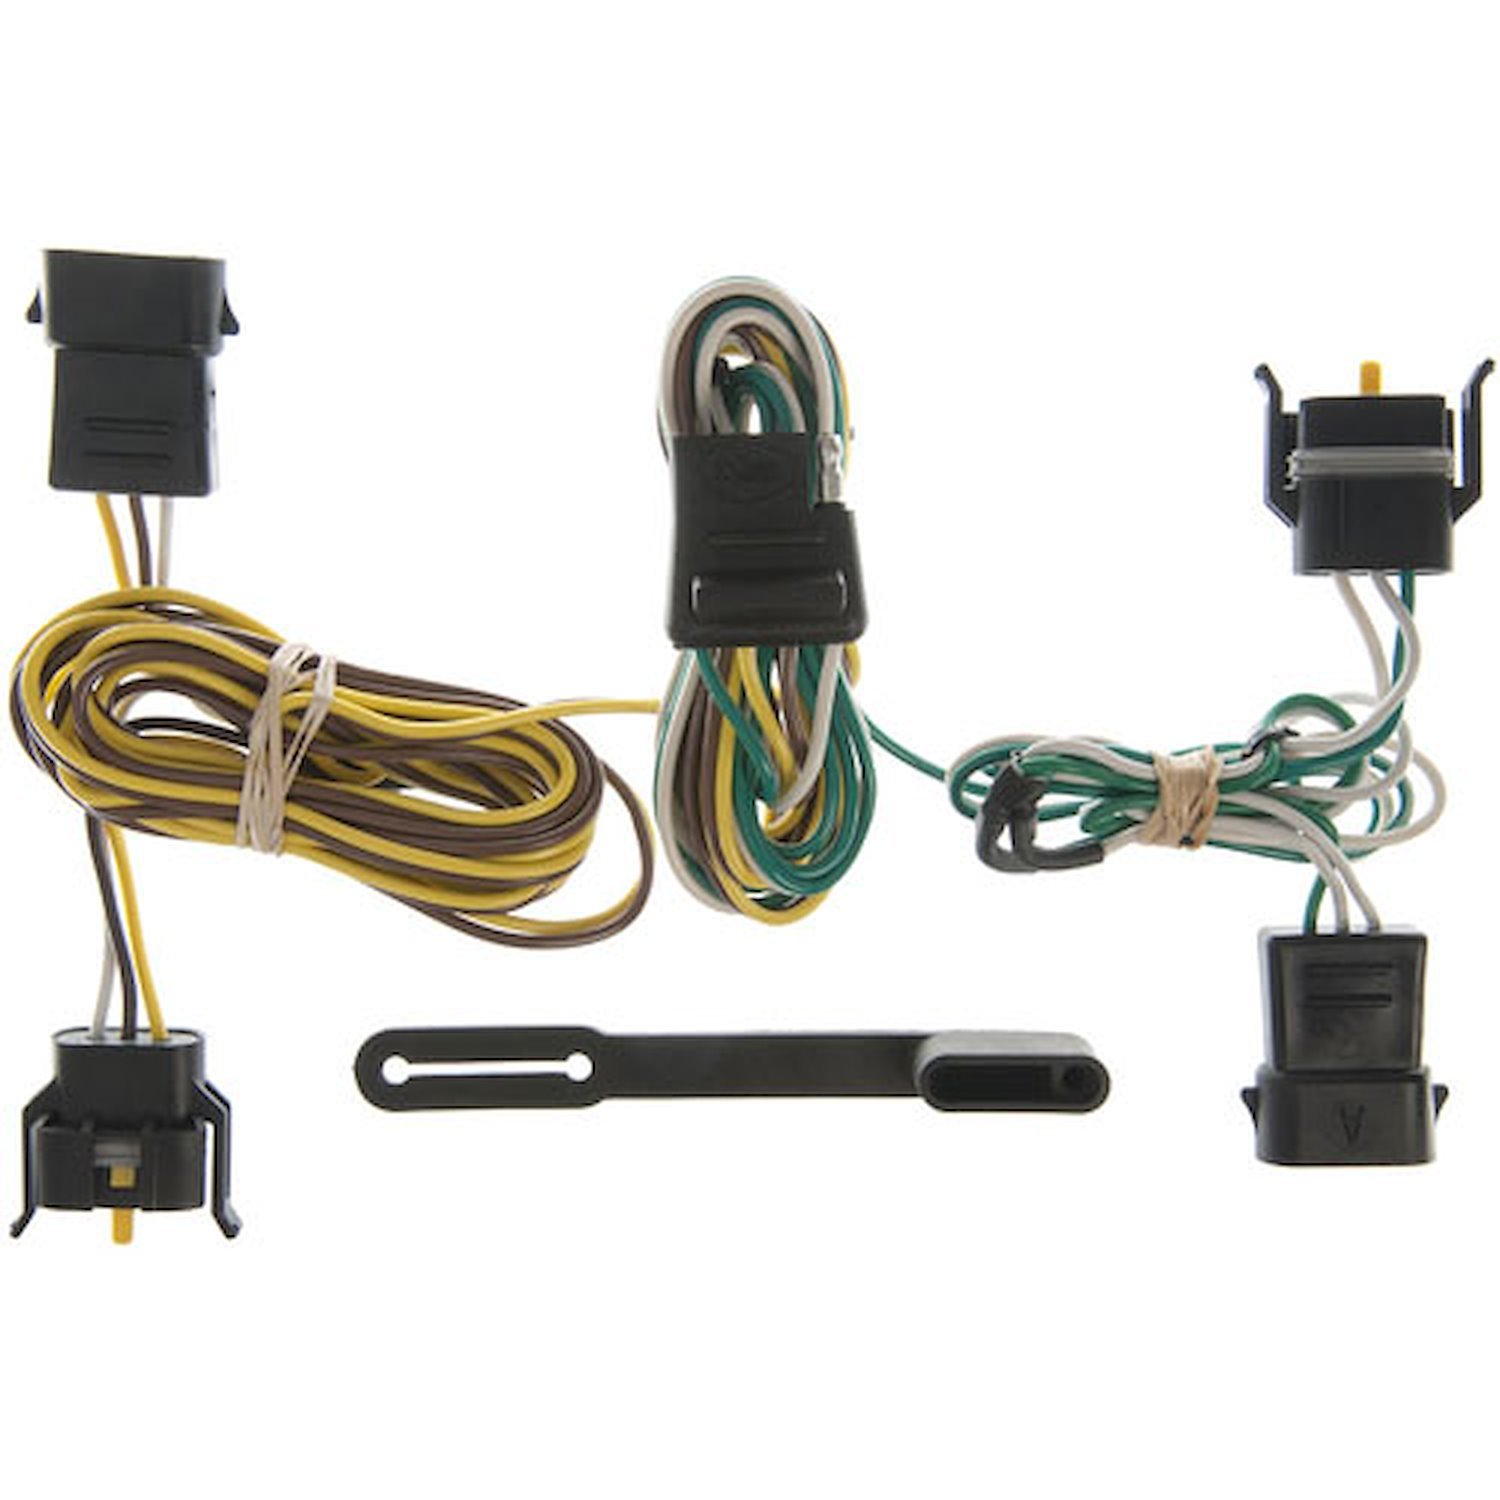 T-Connector / 2 Wire Electrical System 1995-03 Econoline Full Size Van